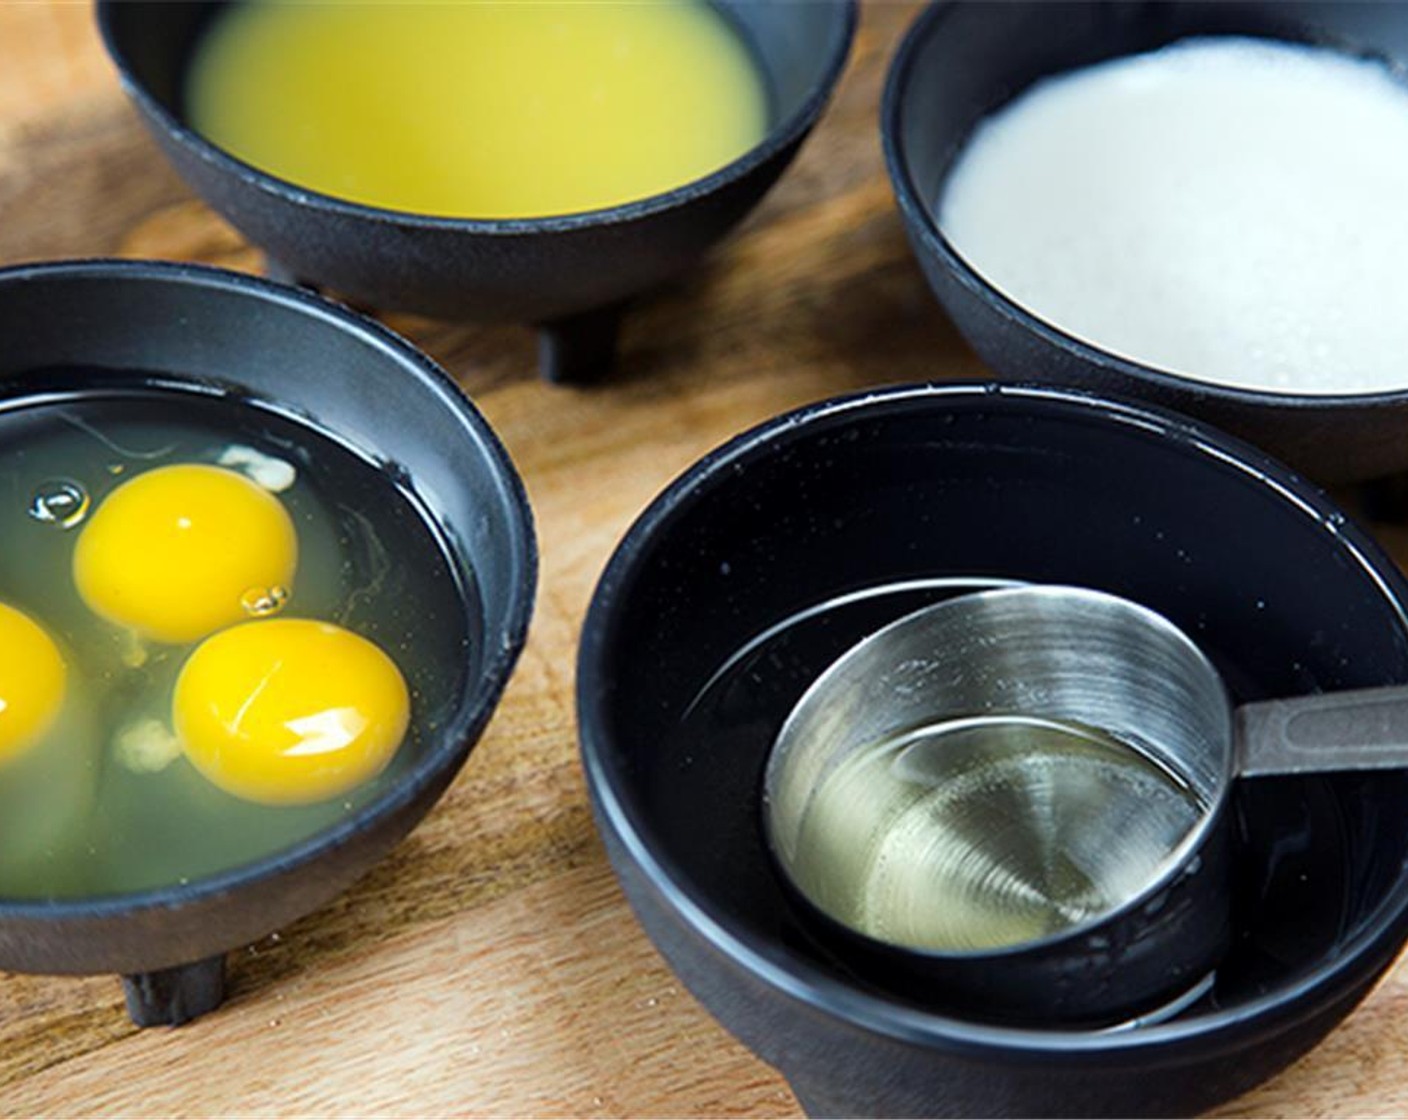 step 2 In a small bowl combine Eggs (3), Oranges (2), Milk (1/2 cup), Oil (1/2 cup) and set aside.